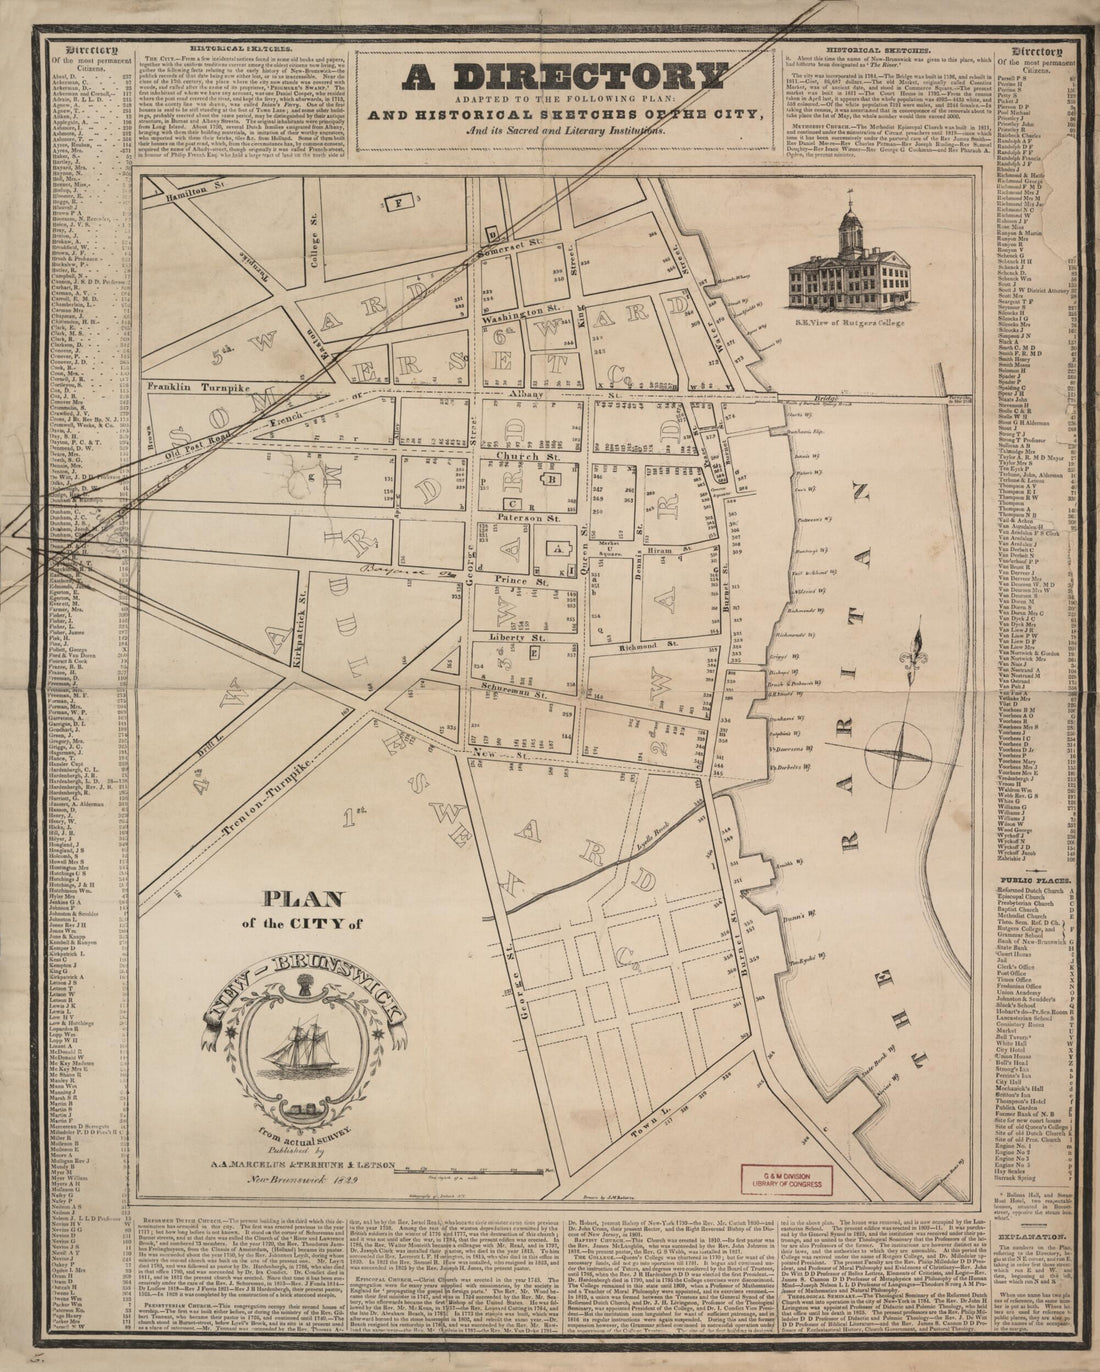 This old map of Brunswick : from Actual Survey (A Directory Adapted to the Following Plan and Historical Sketch of the City, and Its Sacred and Literary Institutions) from 1829 was created by J. M. Roberts,  Terhune &amp; Letson in 1829